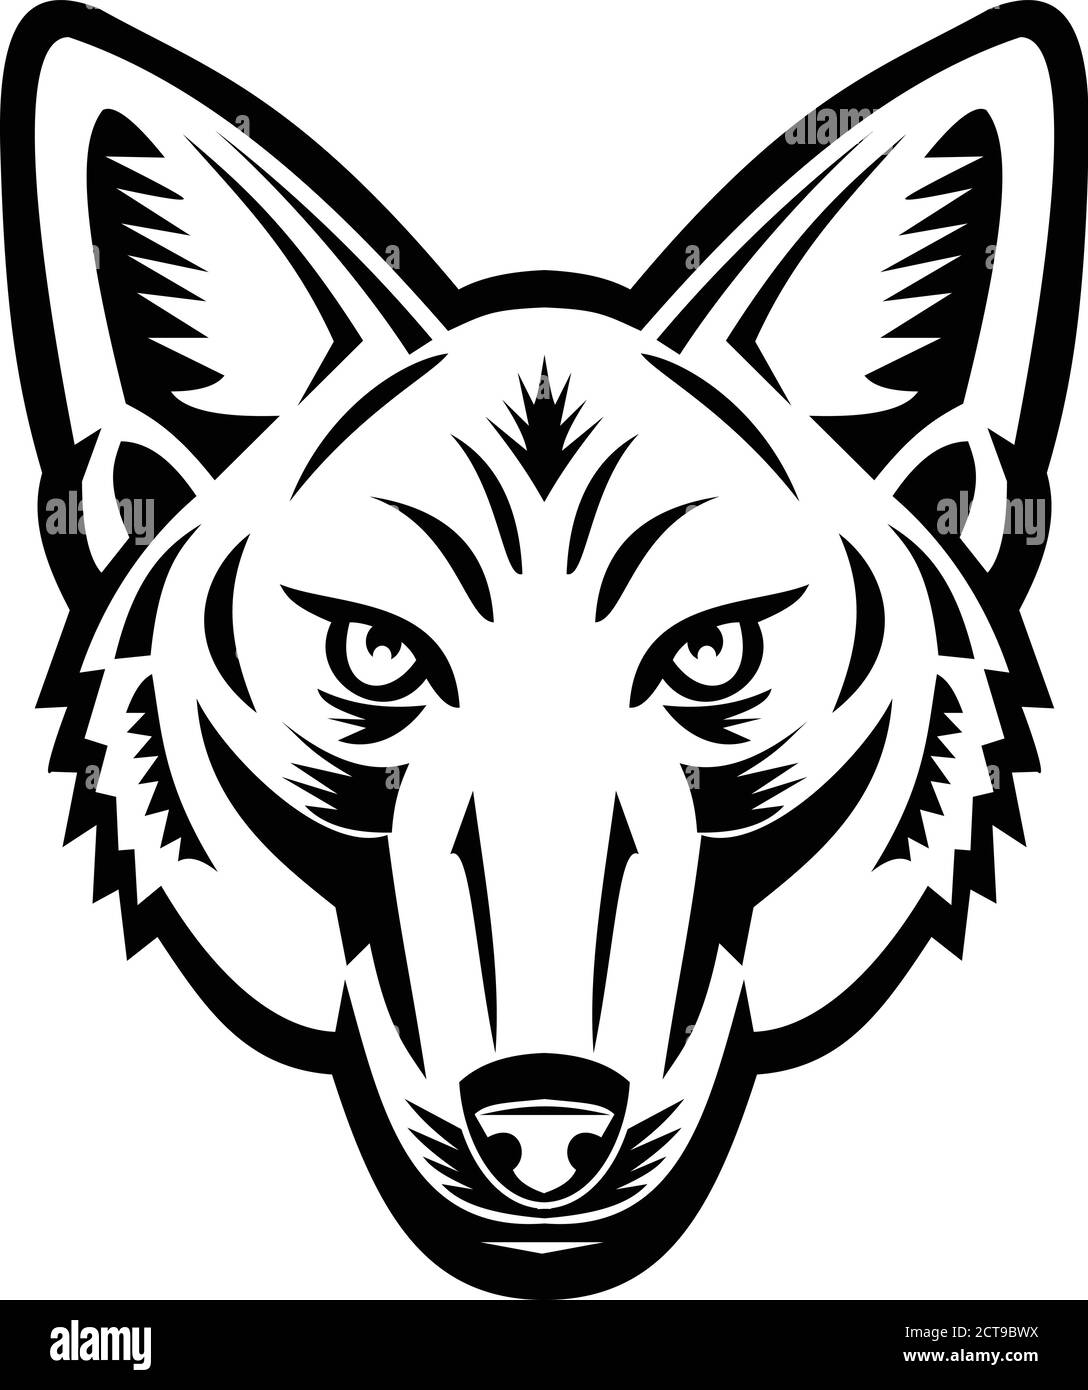 Mascot black and white illustration of head of a Jackal or sometimes called American jackal viewed from front on isolated background in retro woodcut Stock Vector